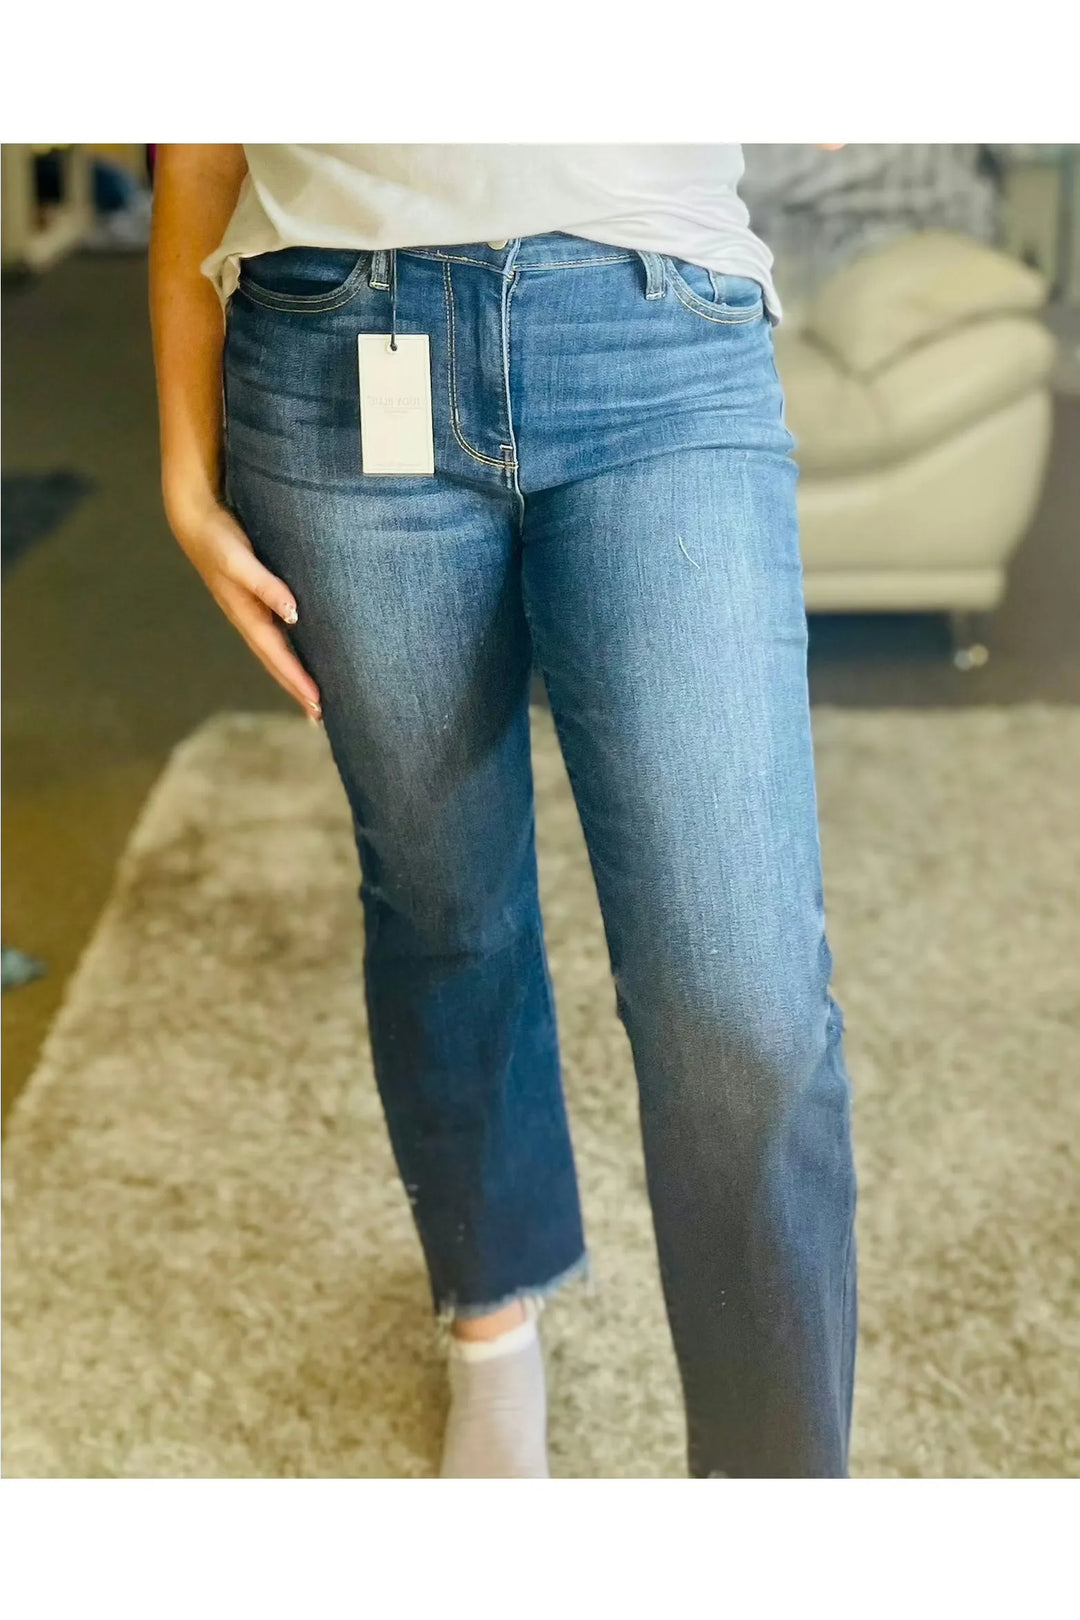 Judy Blue Boot Cut Cropped Jeans - Vintage Dragonfly